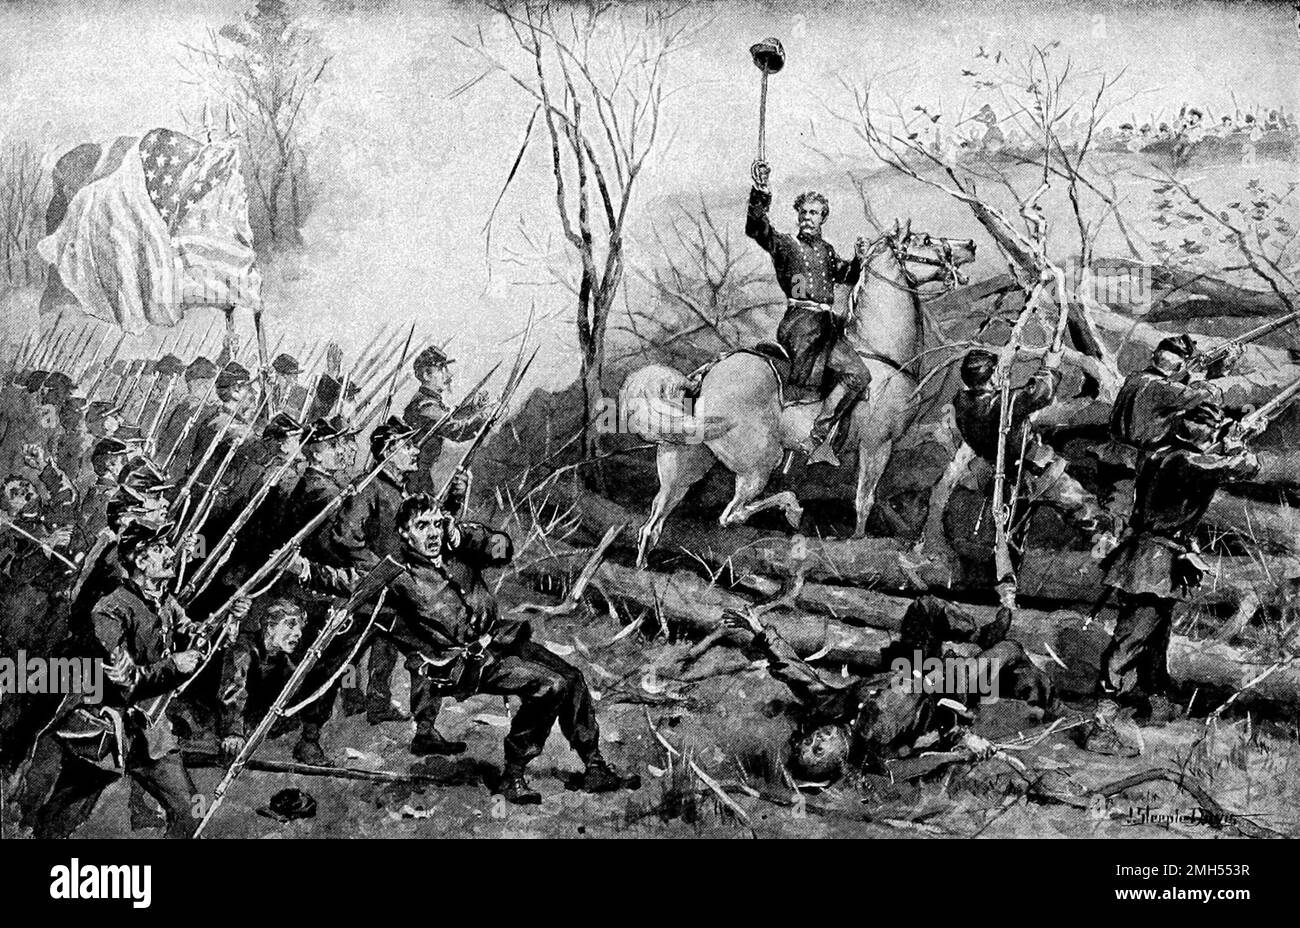 The Battle of Fort Donelson was a battle in the American Civil War fought on 11-12th February 1862 in Kentucky. It was an Unionist amphibious assault on Fort Donelson under the command of Ulysses Grant, and it was a Unionist victory as the fort was captured. The image depicts General Charles Smith on horseback leading his troops. Stock Photo